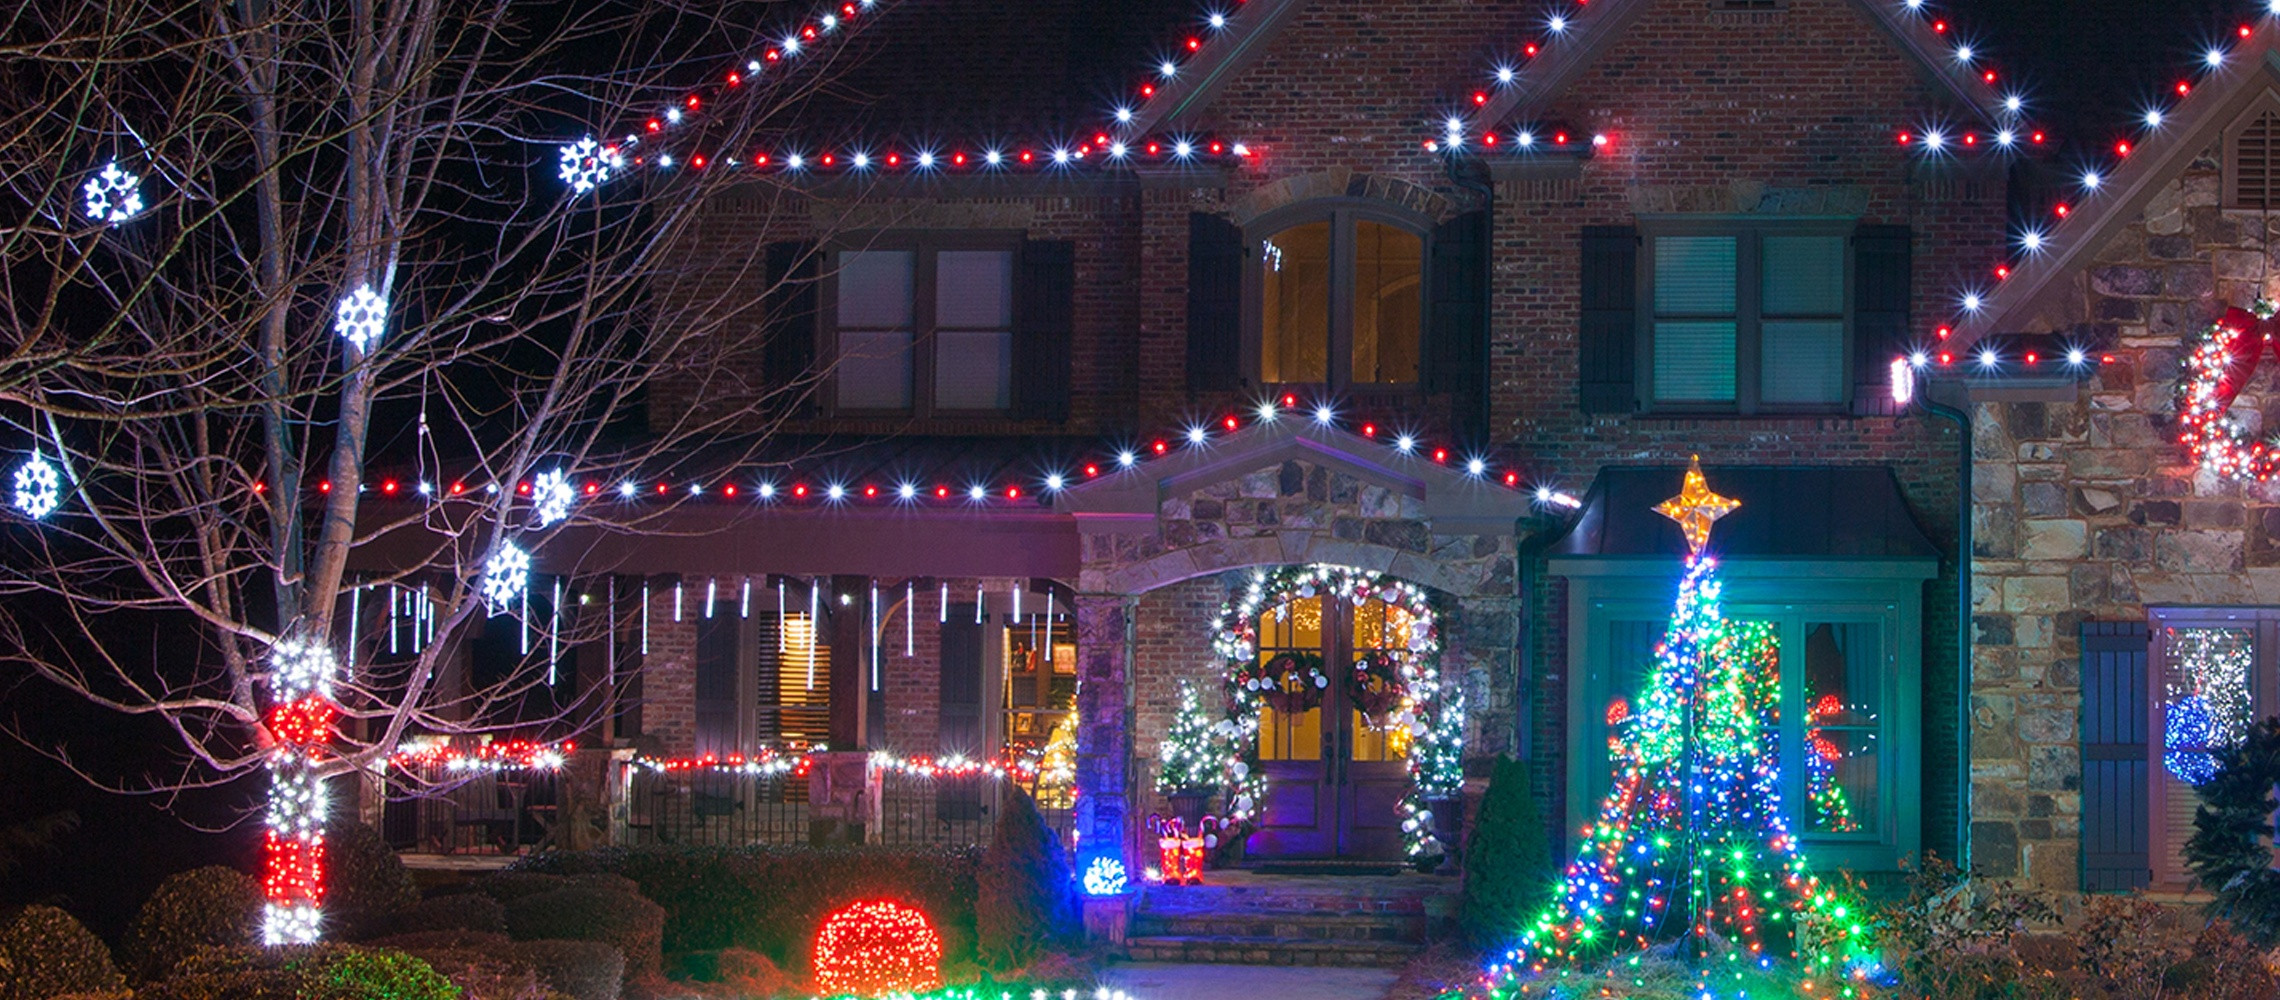 Christmas Rooftop Decorating Ideas
 Outdoor Christmas Lights Ideas For The Roof